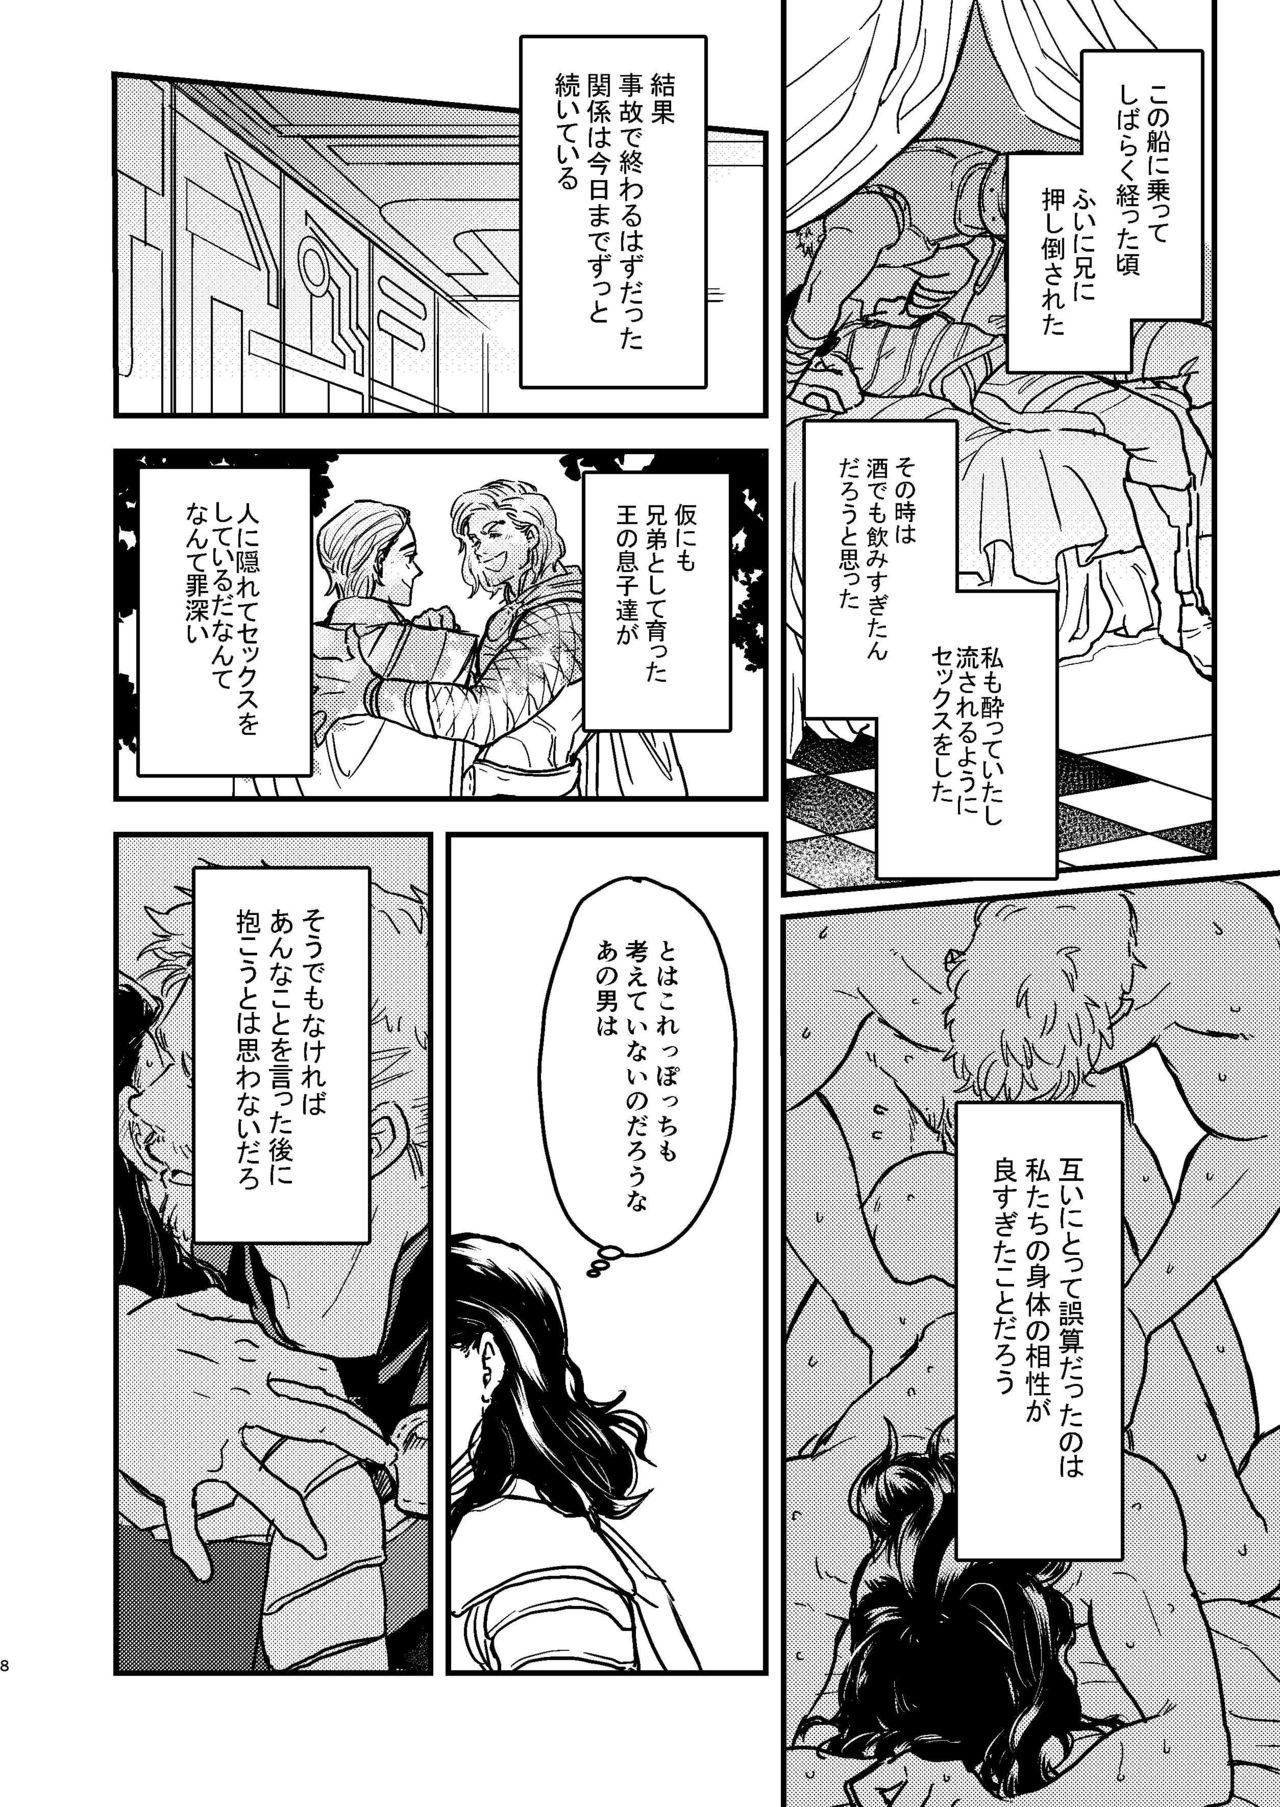 Gay Solo Sore o Nanto Yobebaii - What should I call it? - Avengers Facesitting - Page 9